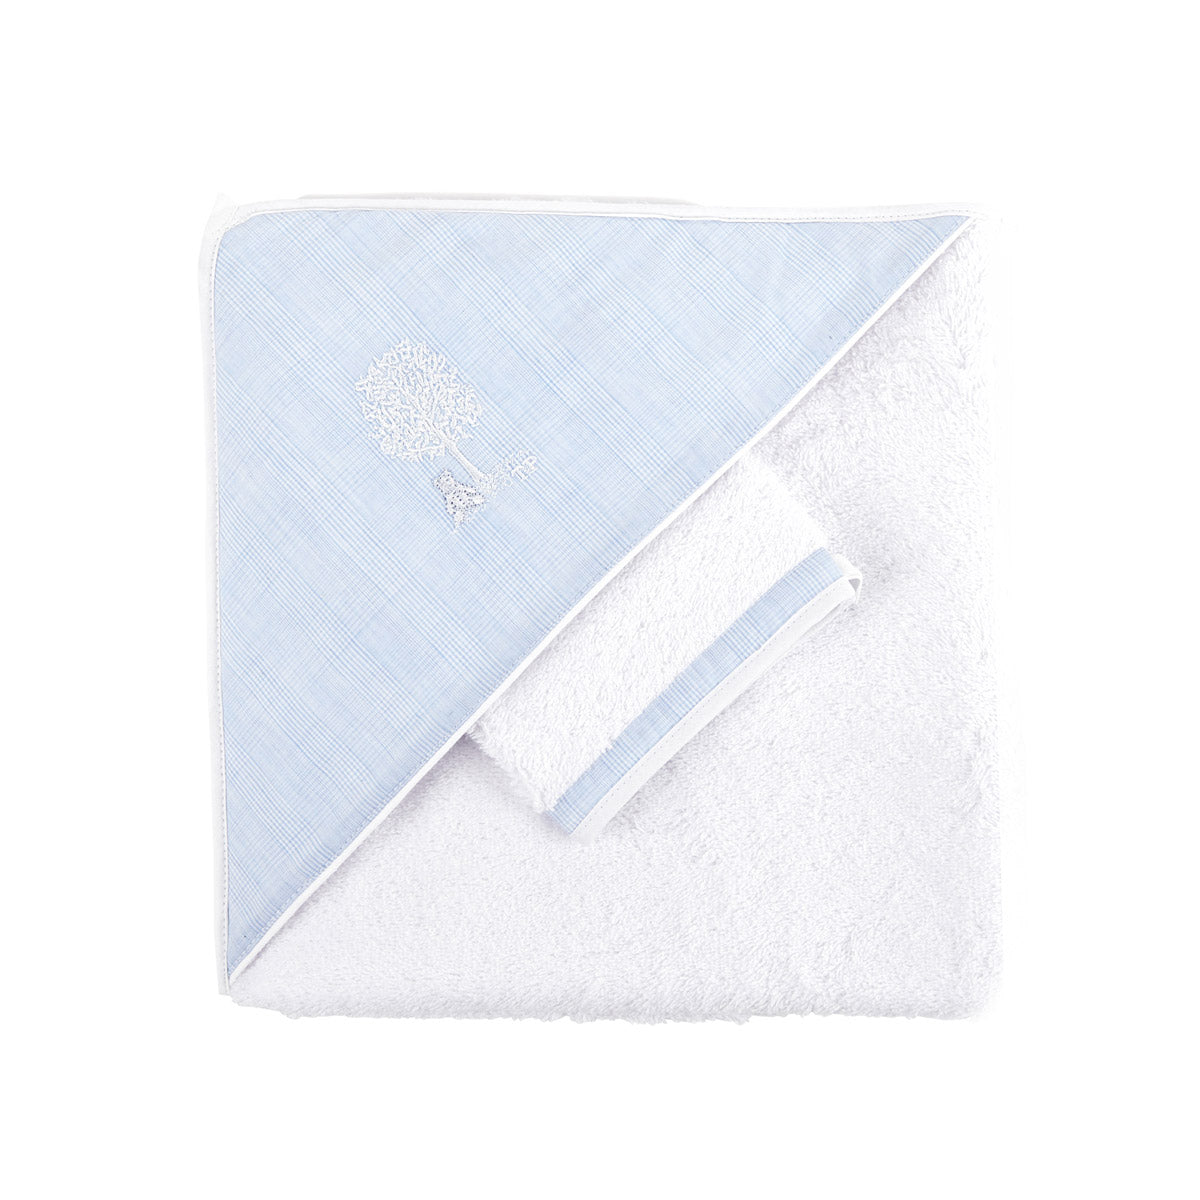 Theophile & Patachou the Hooded Towel and the Matching Glove - Sweet Blue